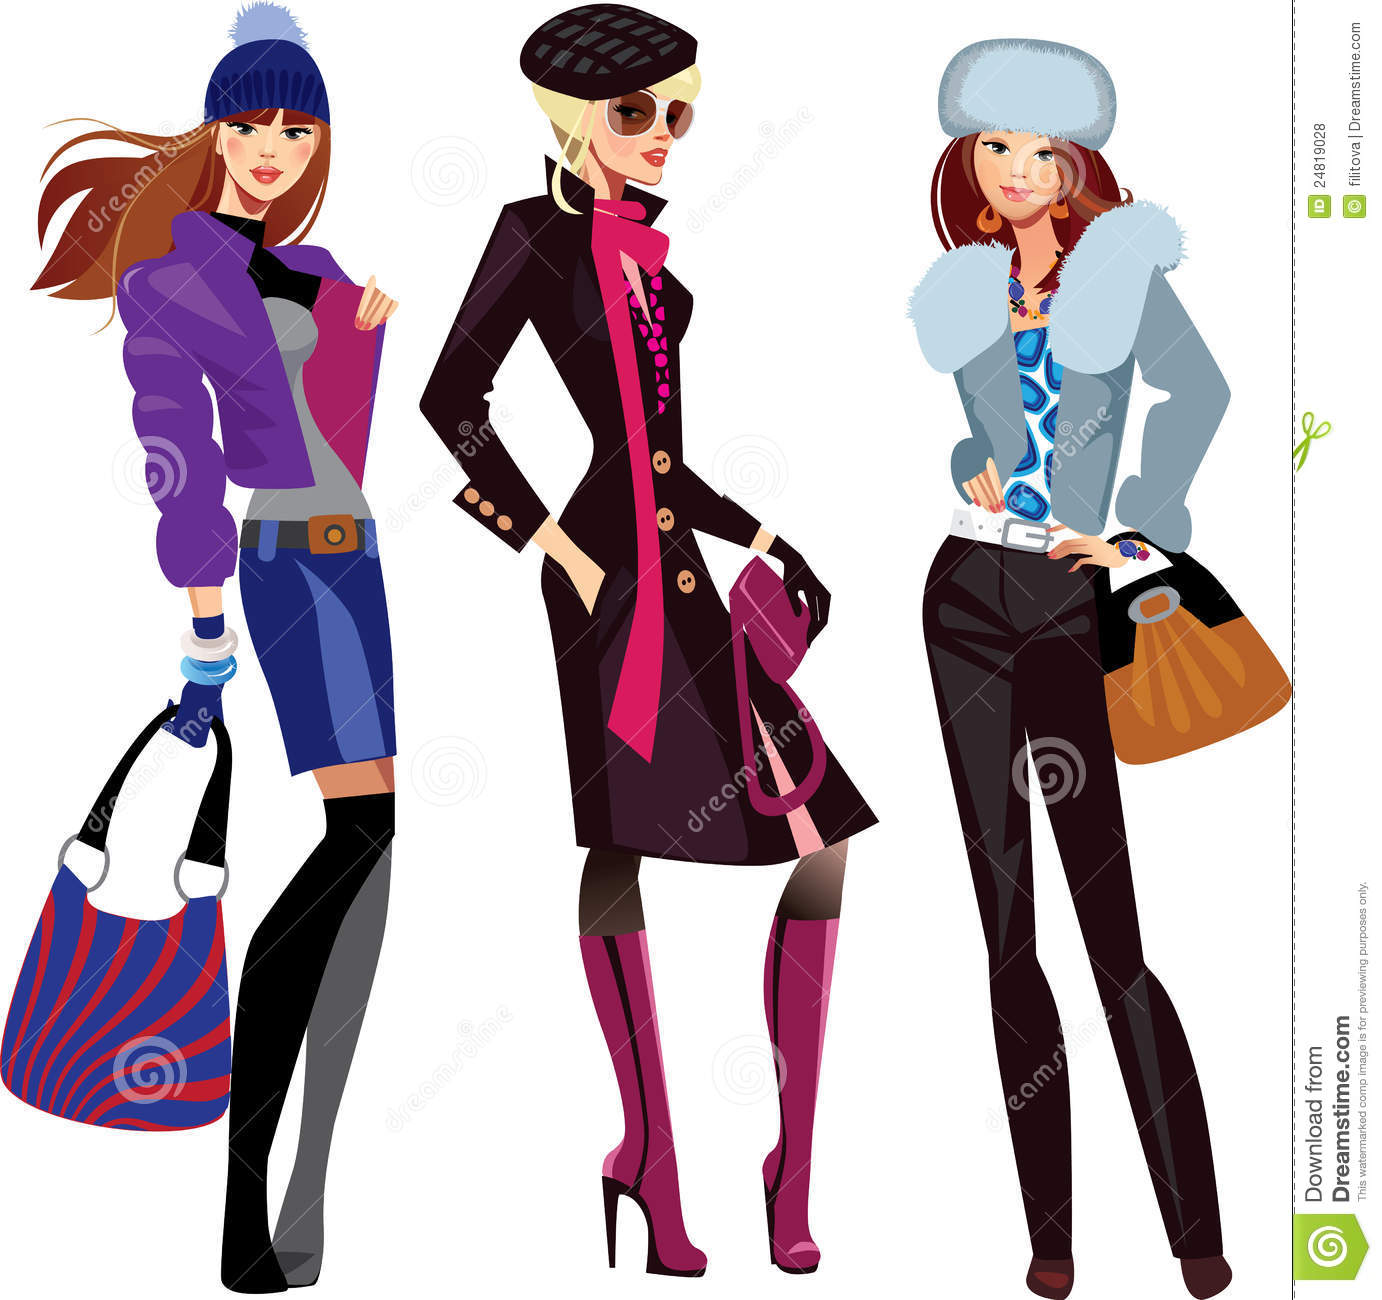 Fashion Women In Winter Clothes Royalty Free Stock Photos   Image